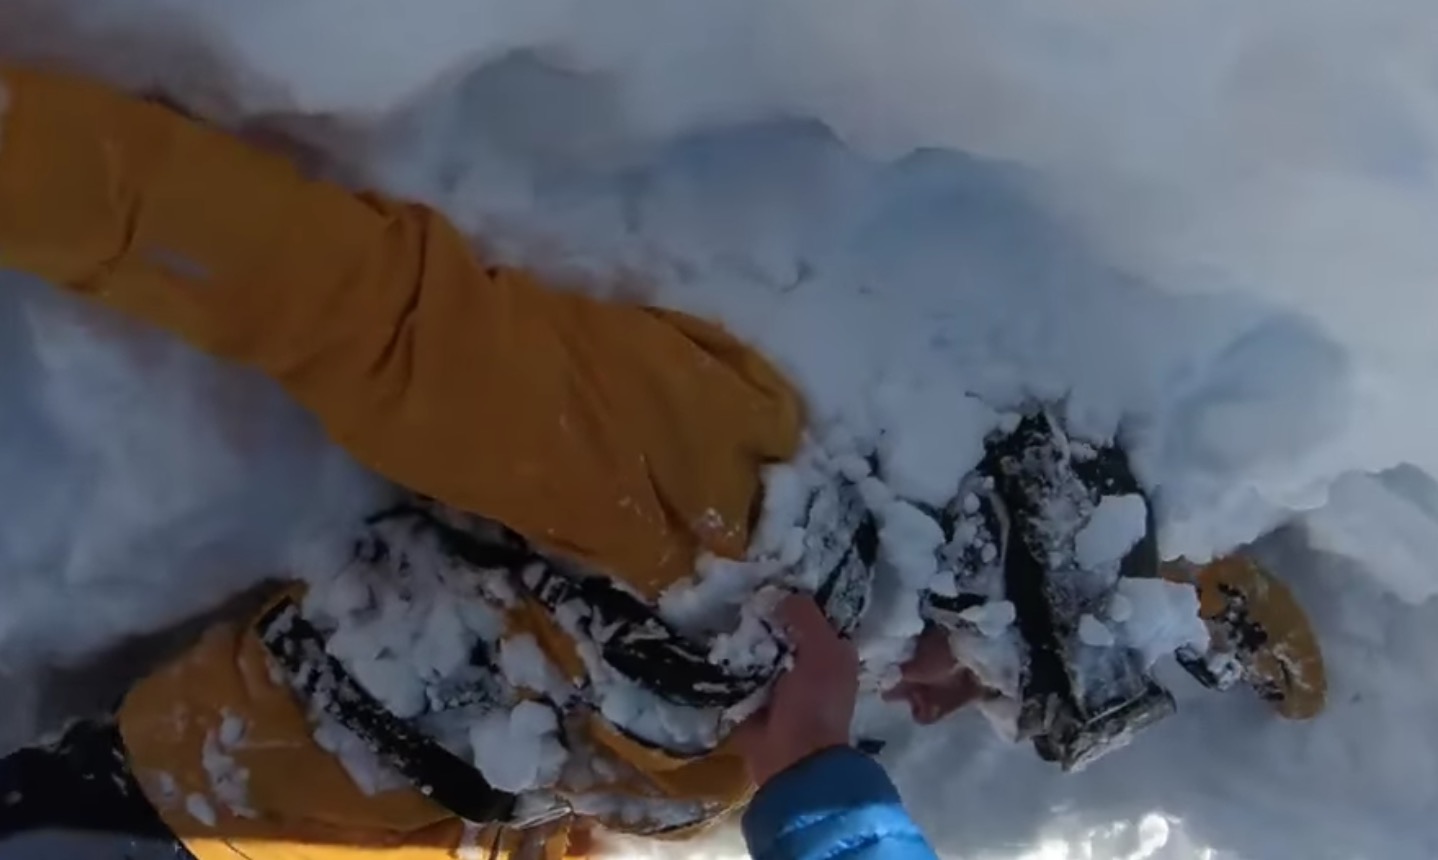 MUST WATCH: Avalanche Trigger, Burial & Rescue Filmed By GoPro